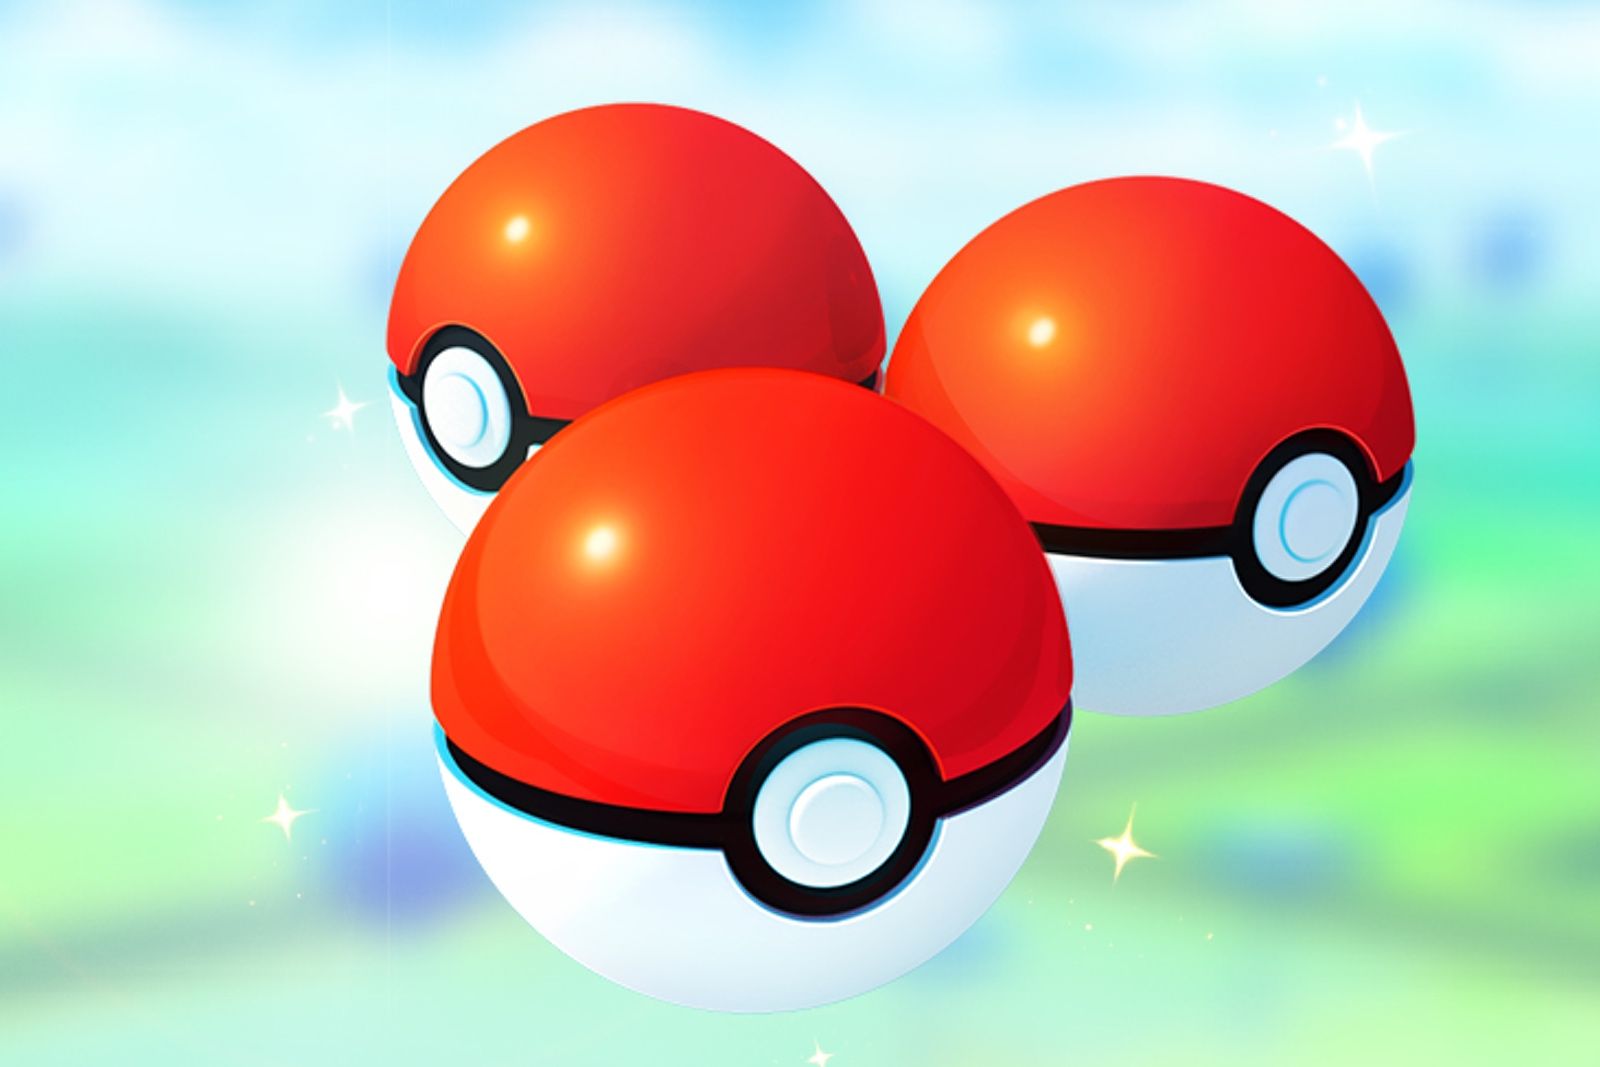 Pokémon Go is getting easier and easier to play from home image 1